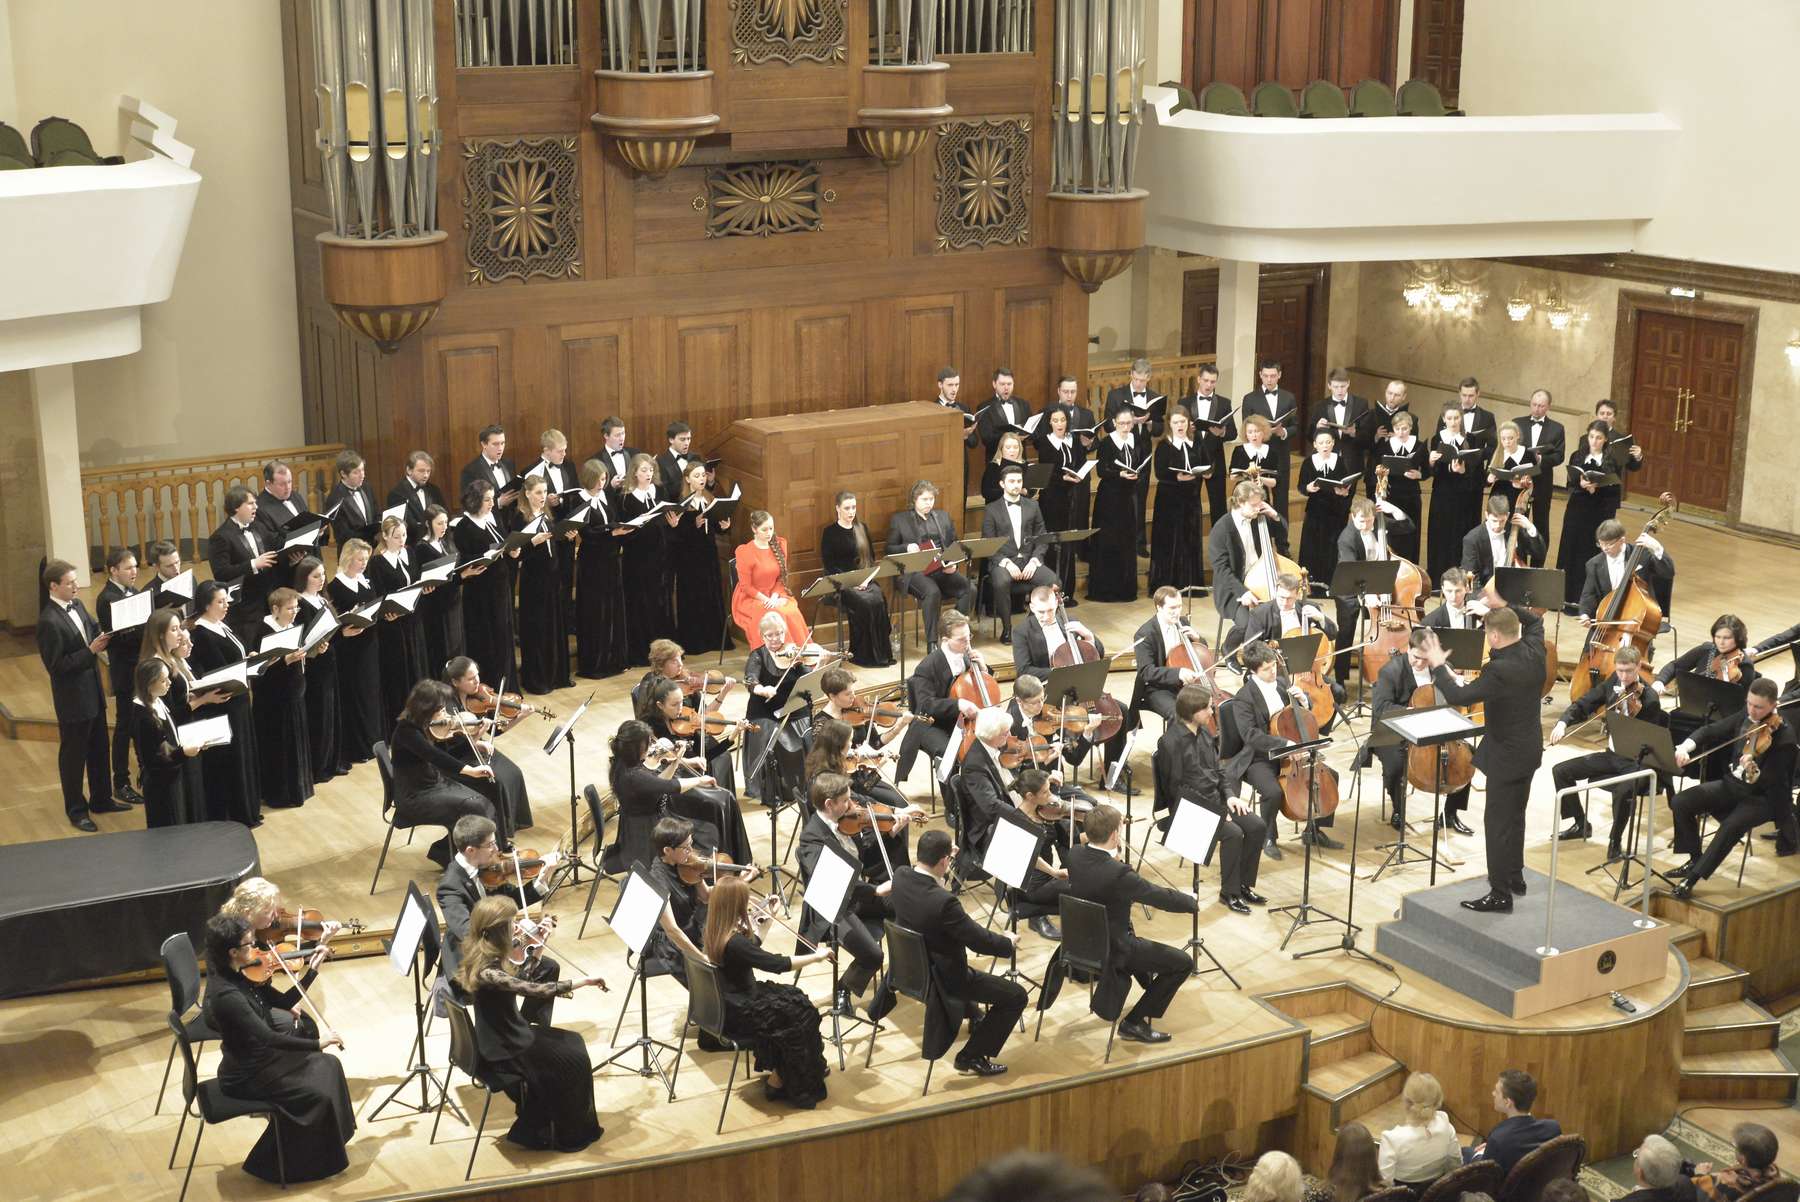 The premiere of “St. Matthew Passion” by Hilarion in Kazan